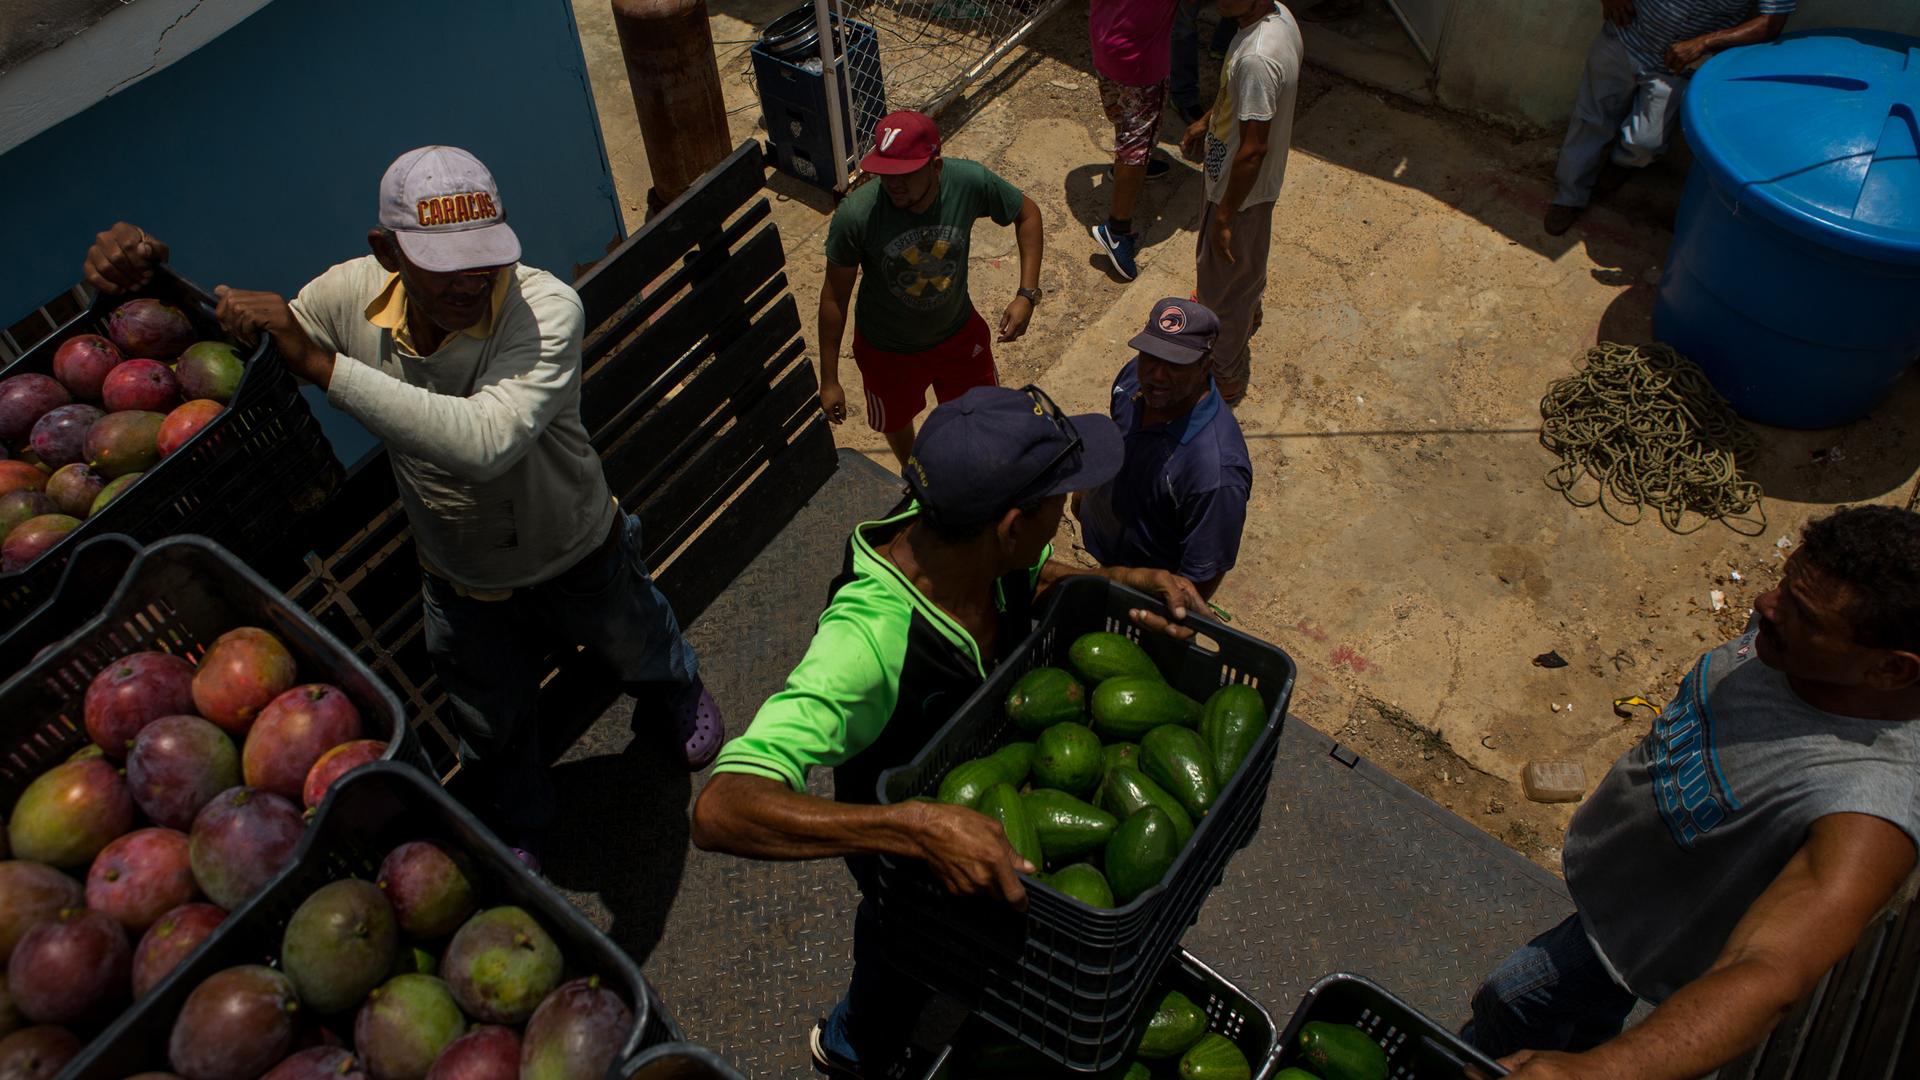 Workers unload produce for sale at a market in Caracas. It's increasingly hazardous work to drive a food delivery truck in Venezuela.